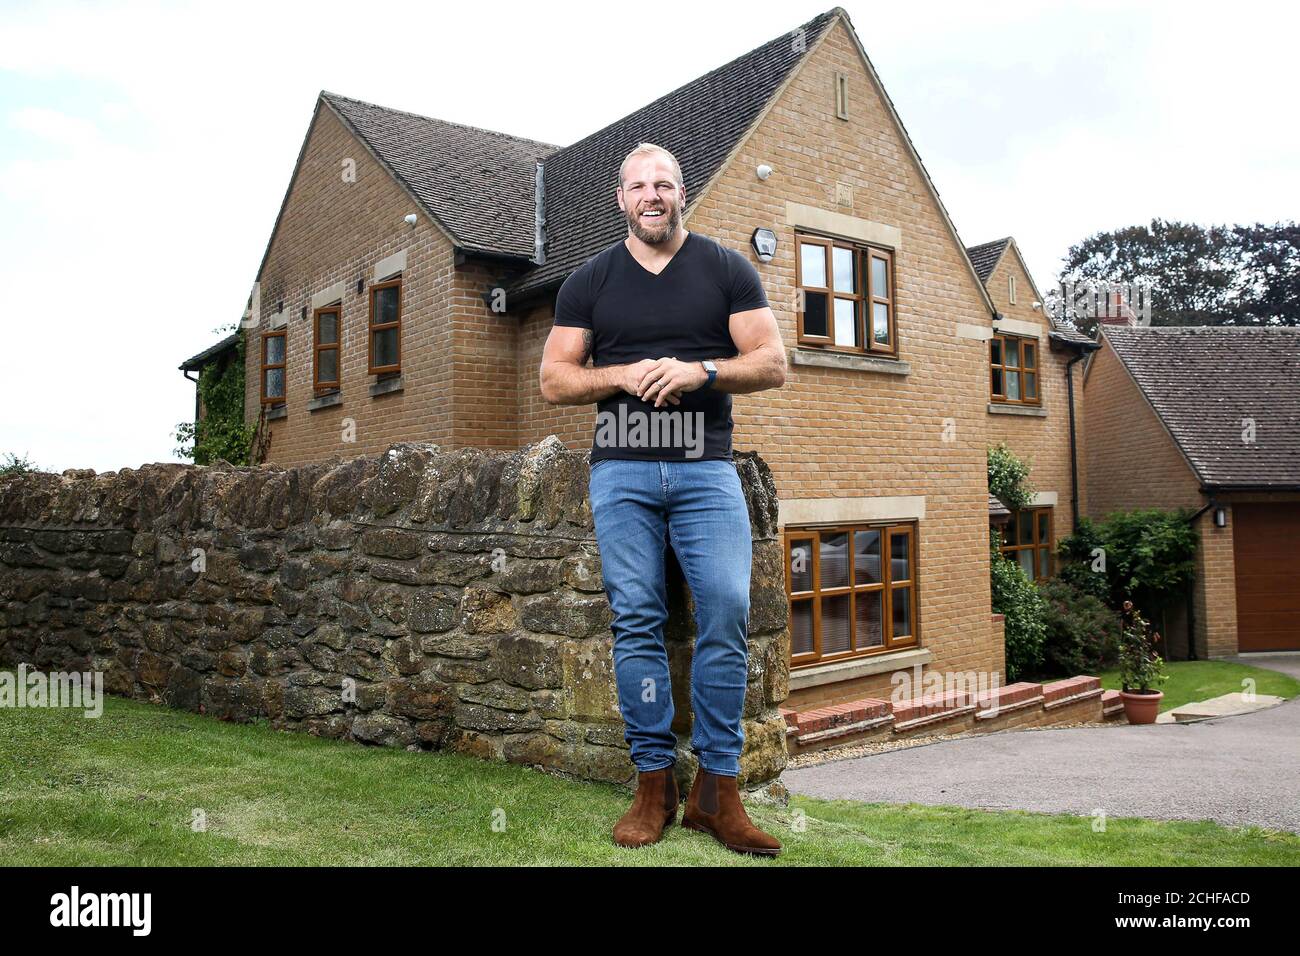 Former England Rugby player James Haskell will be listing his property on Airbnb during the Rugby World Cup, so that fans of the sport who cannot travel to Japan will have the opportunity to enjoy the big sporting moment from his home in Northamptonshire instead. Stock Photo